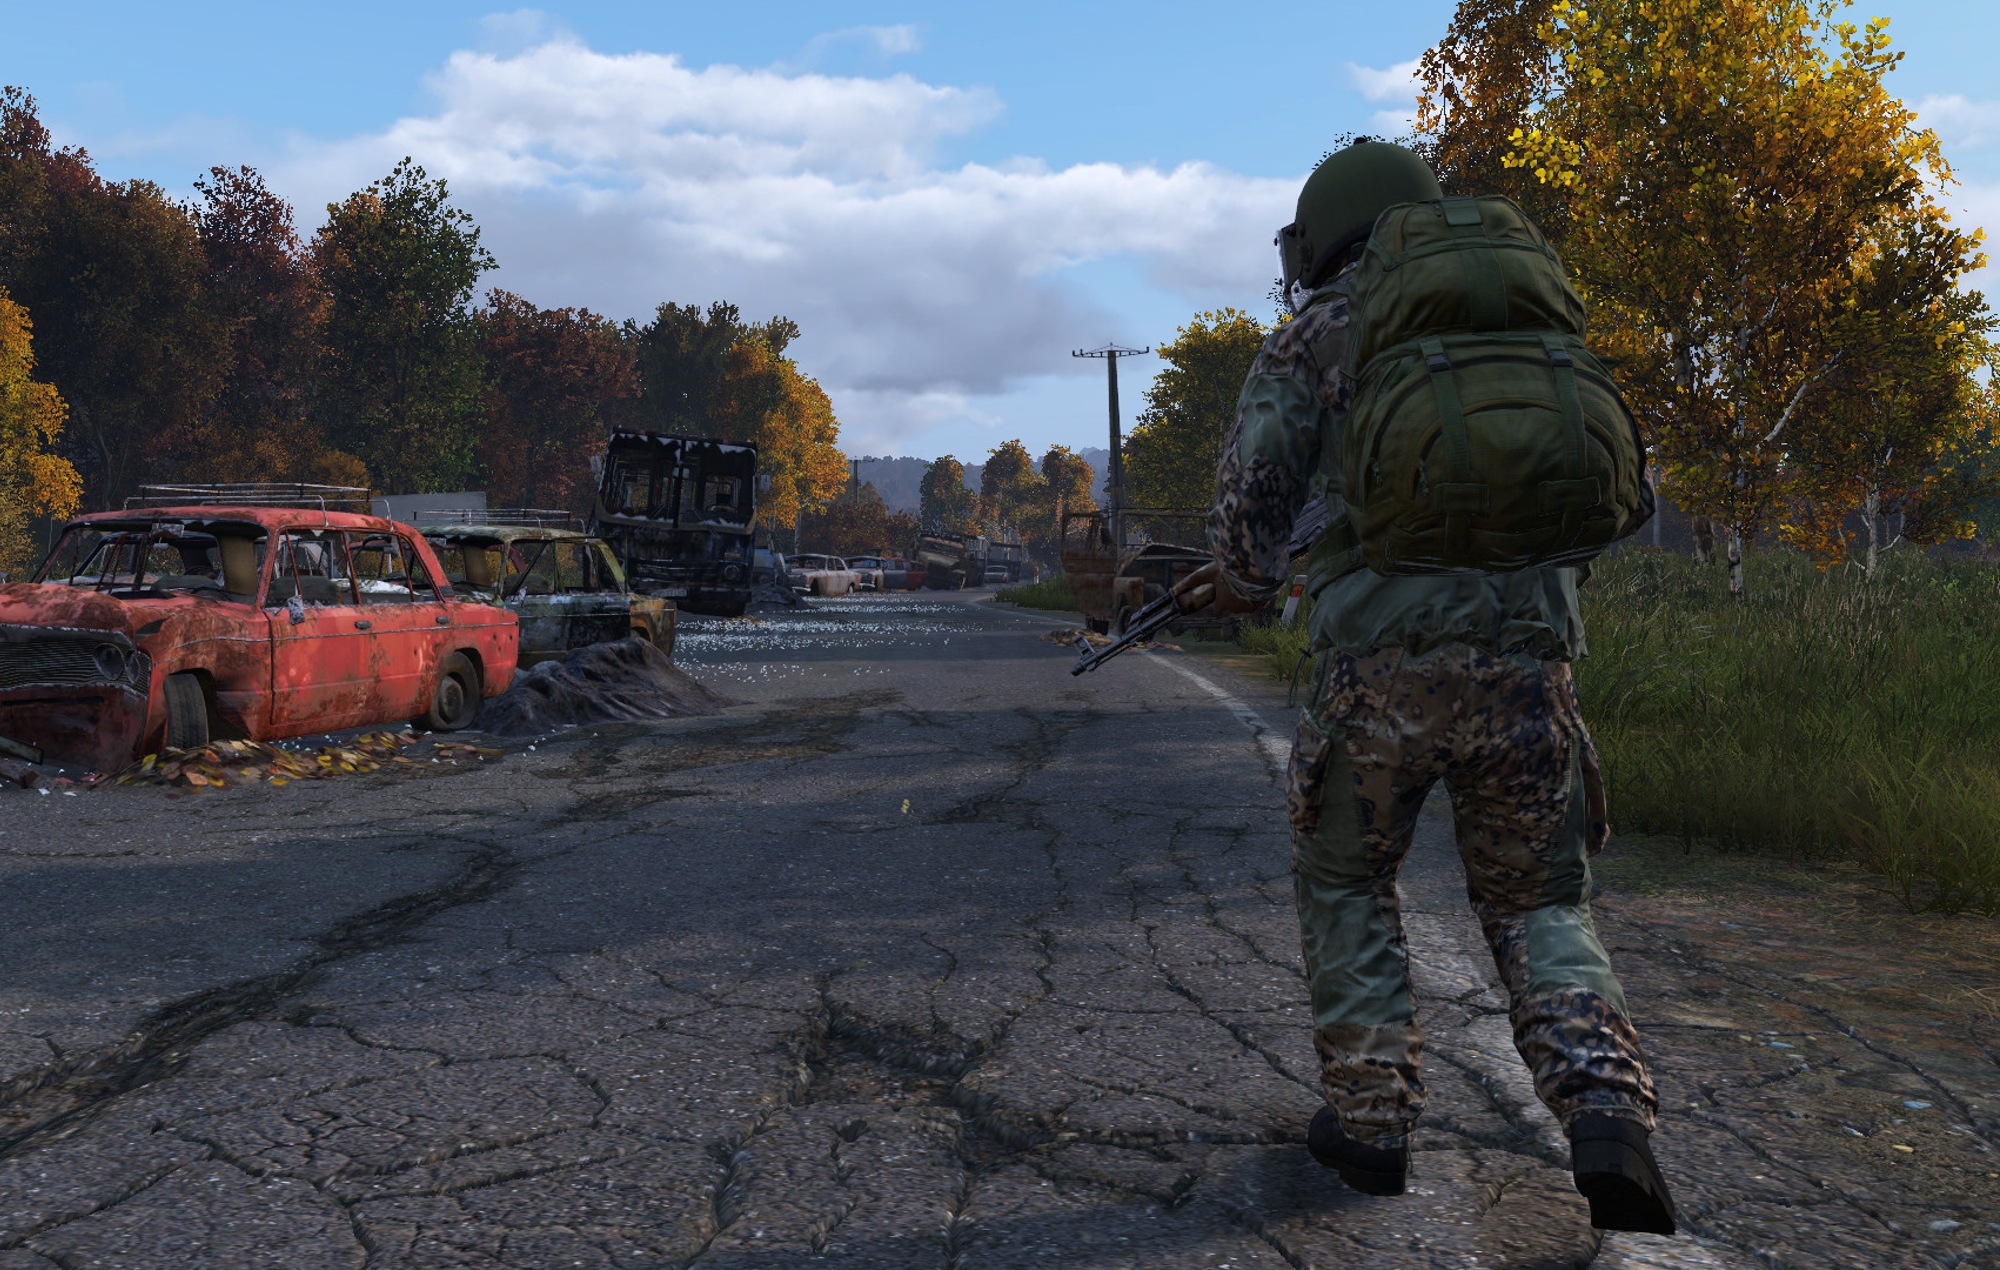 DayZ update adds a grenade launcher, mines, and other explosives